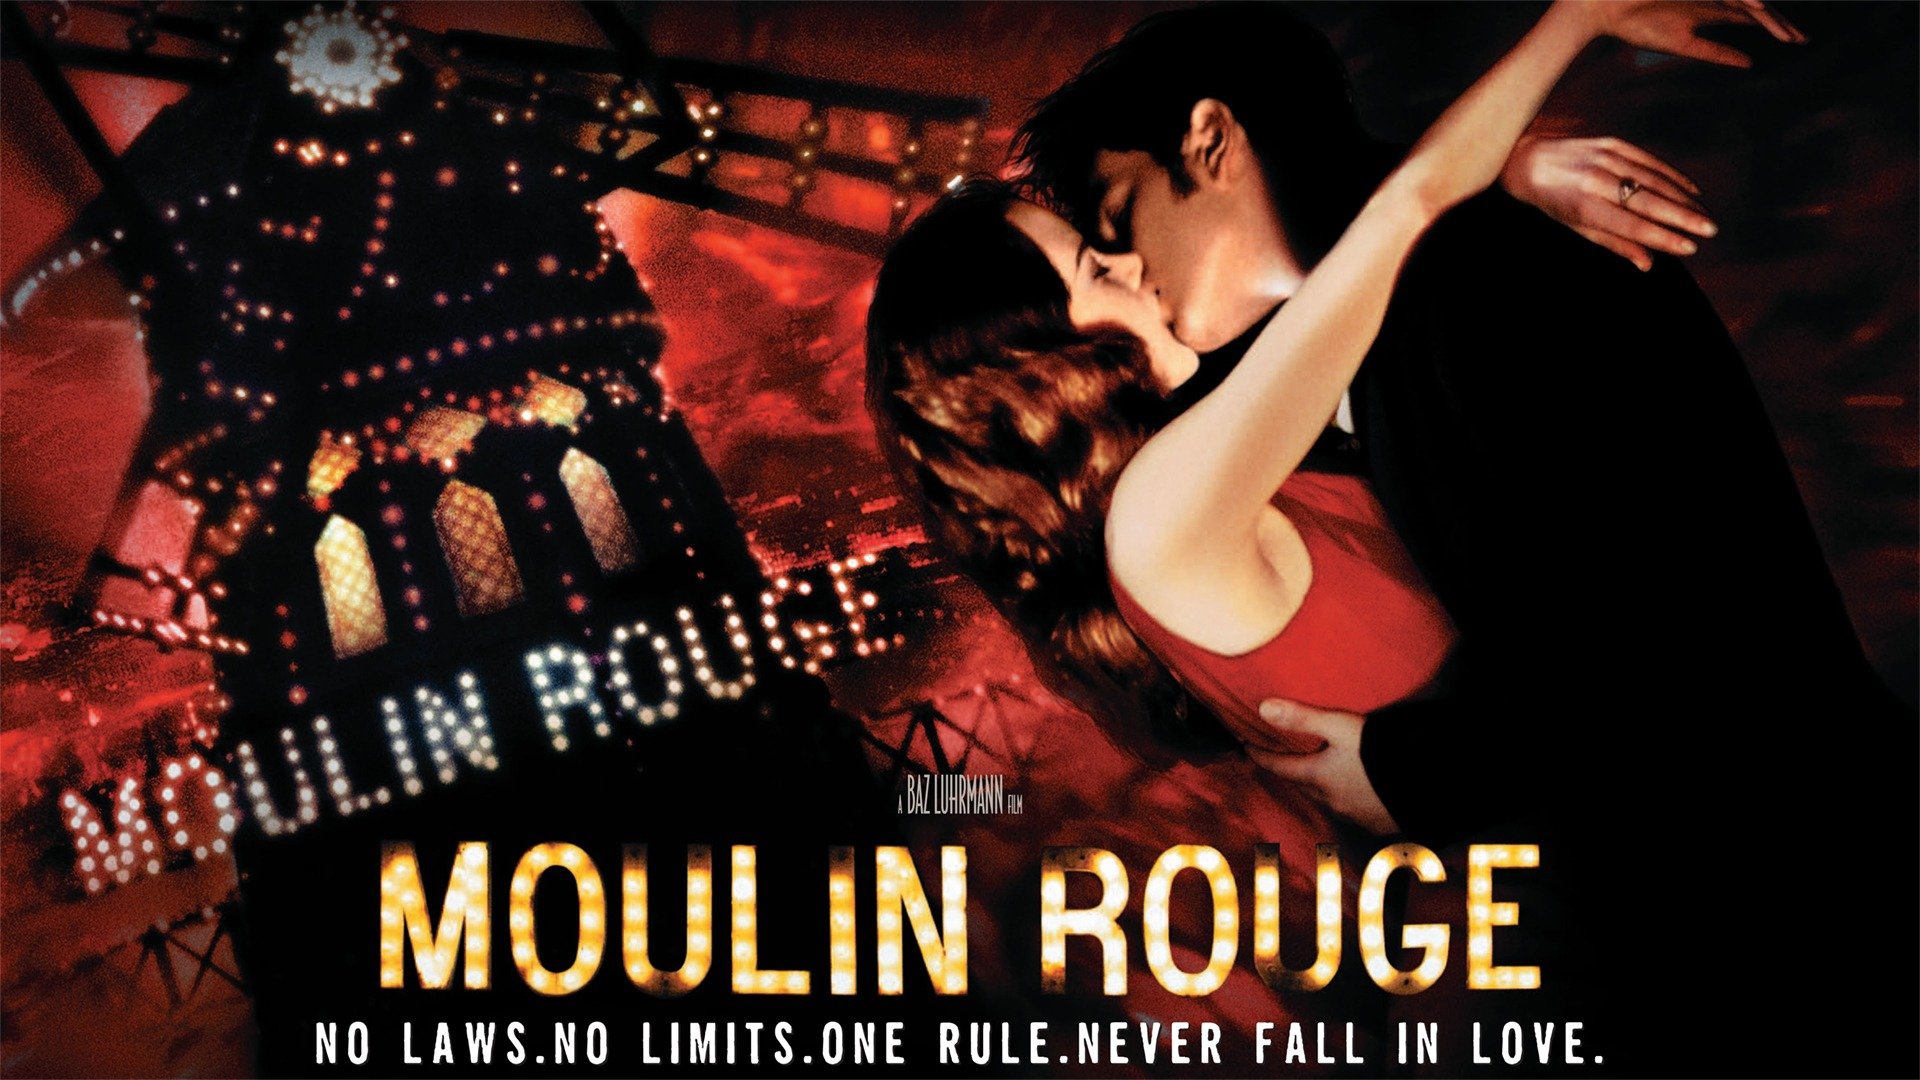 Moulin Rouge Film Poster